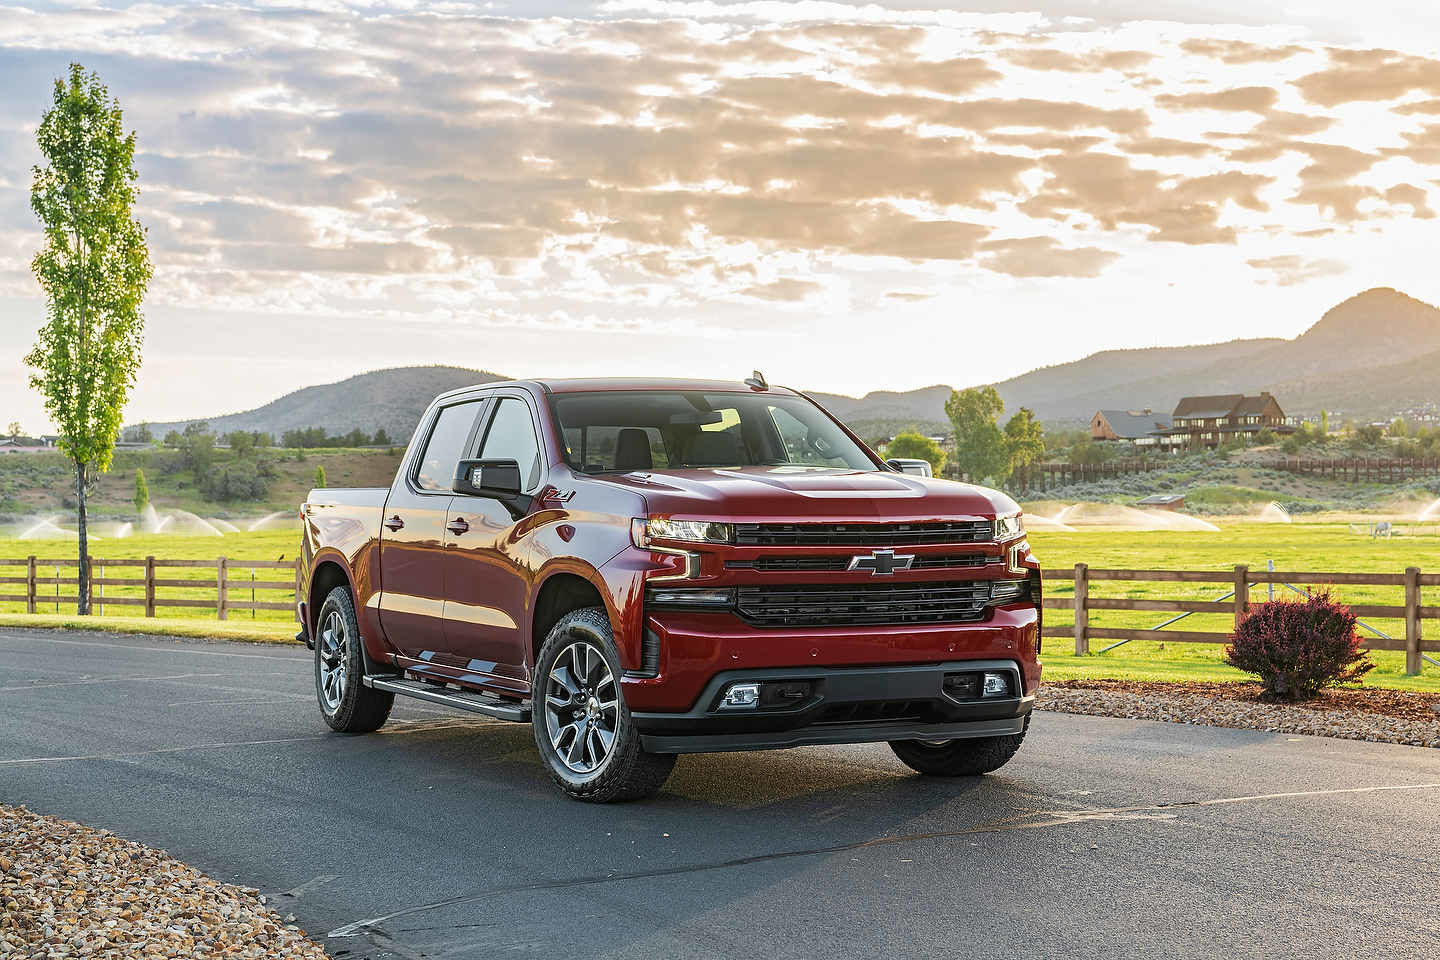 Three New Features on the 2021 Chevrolet Silverado 1500